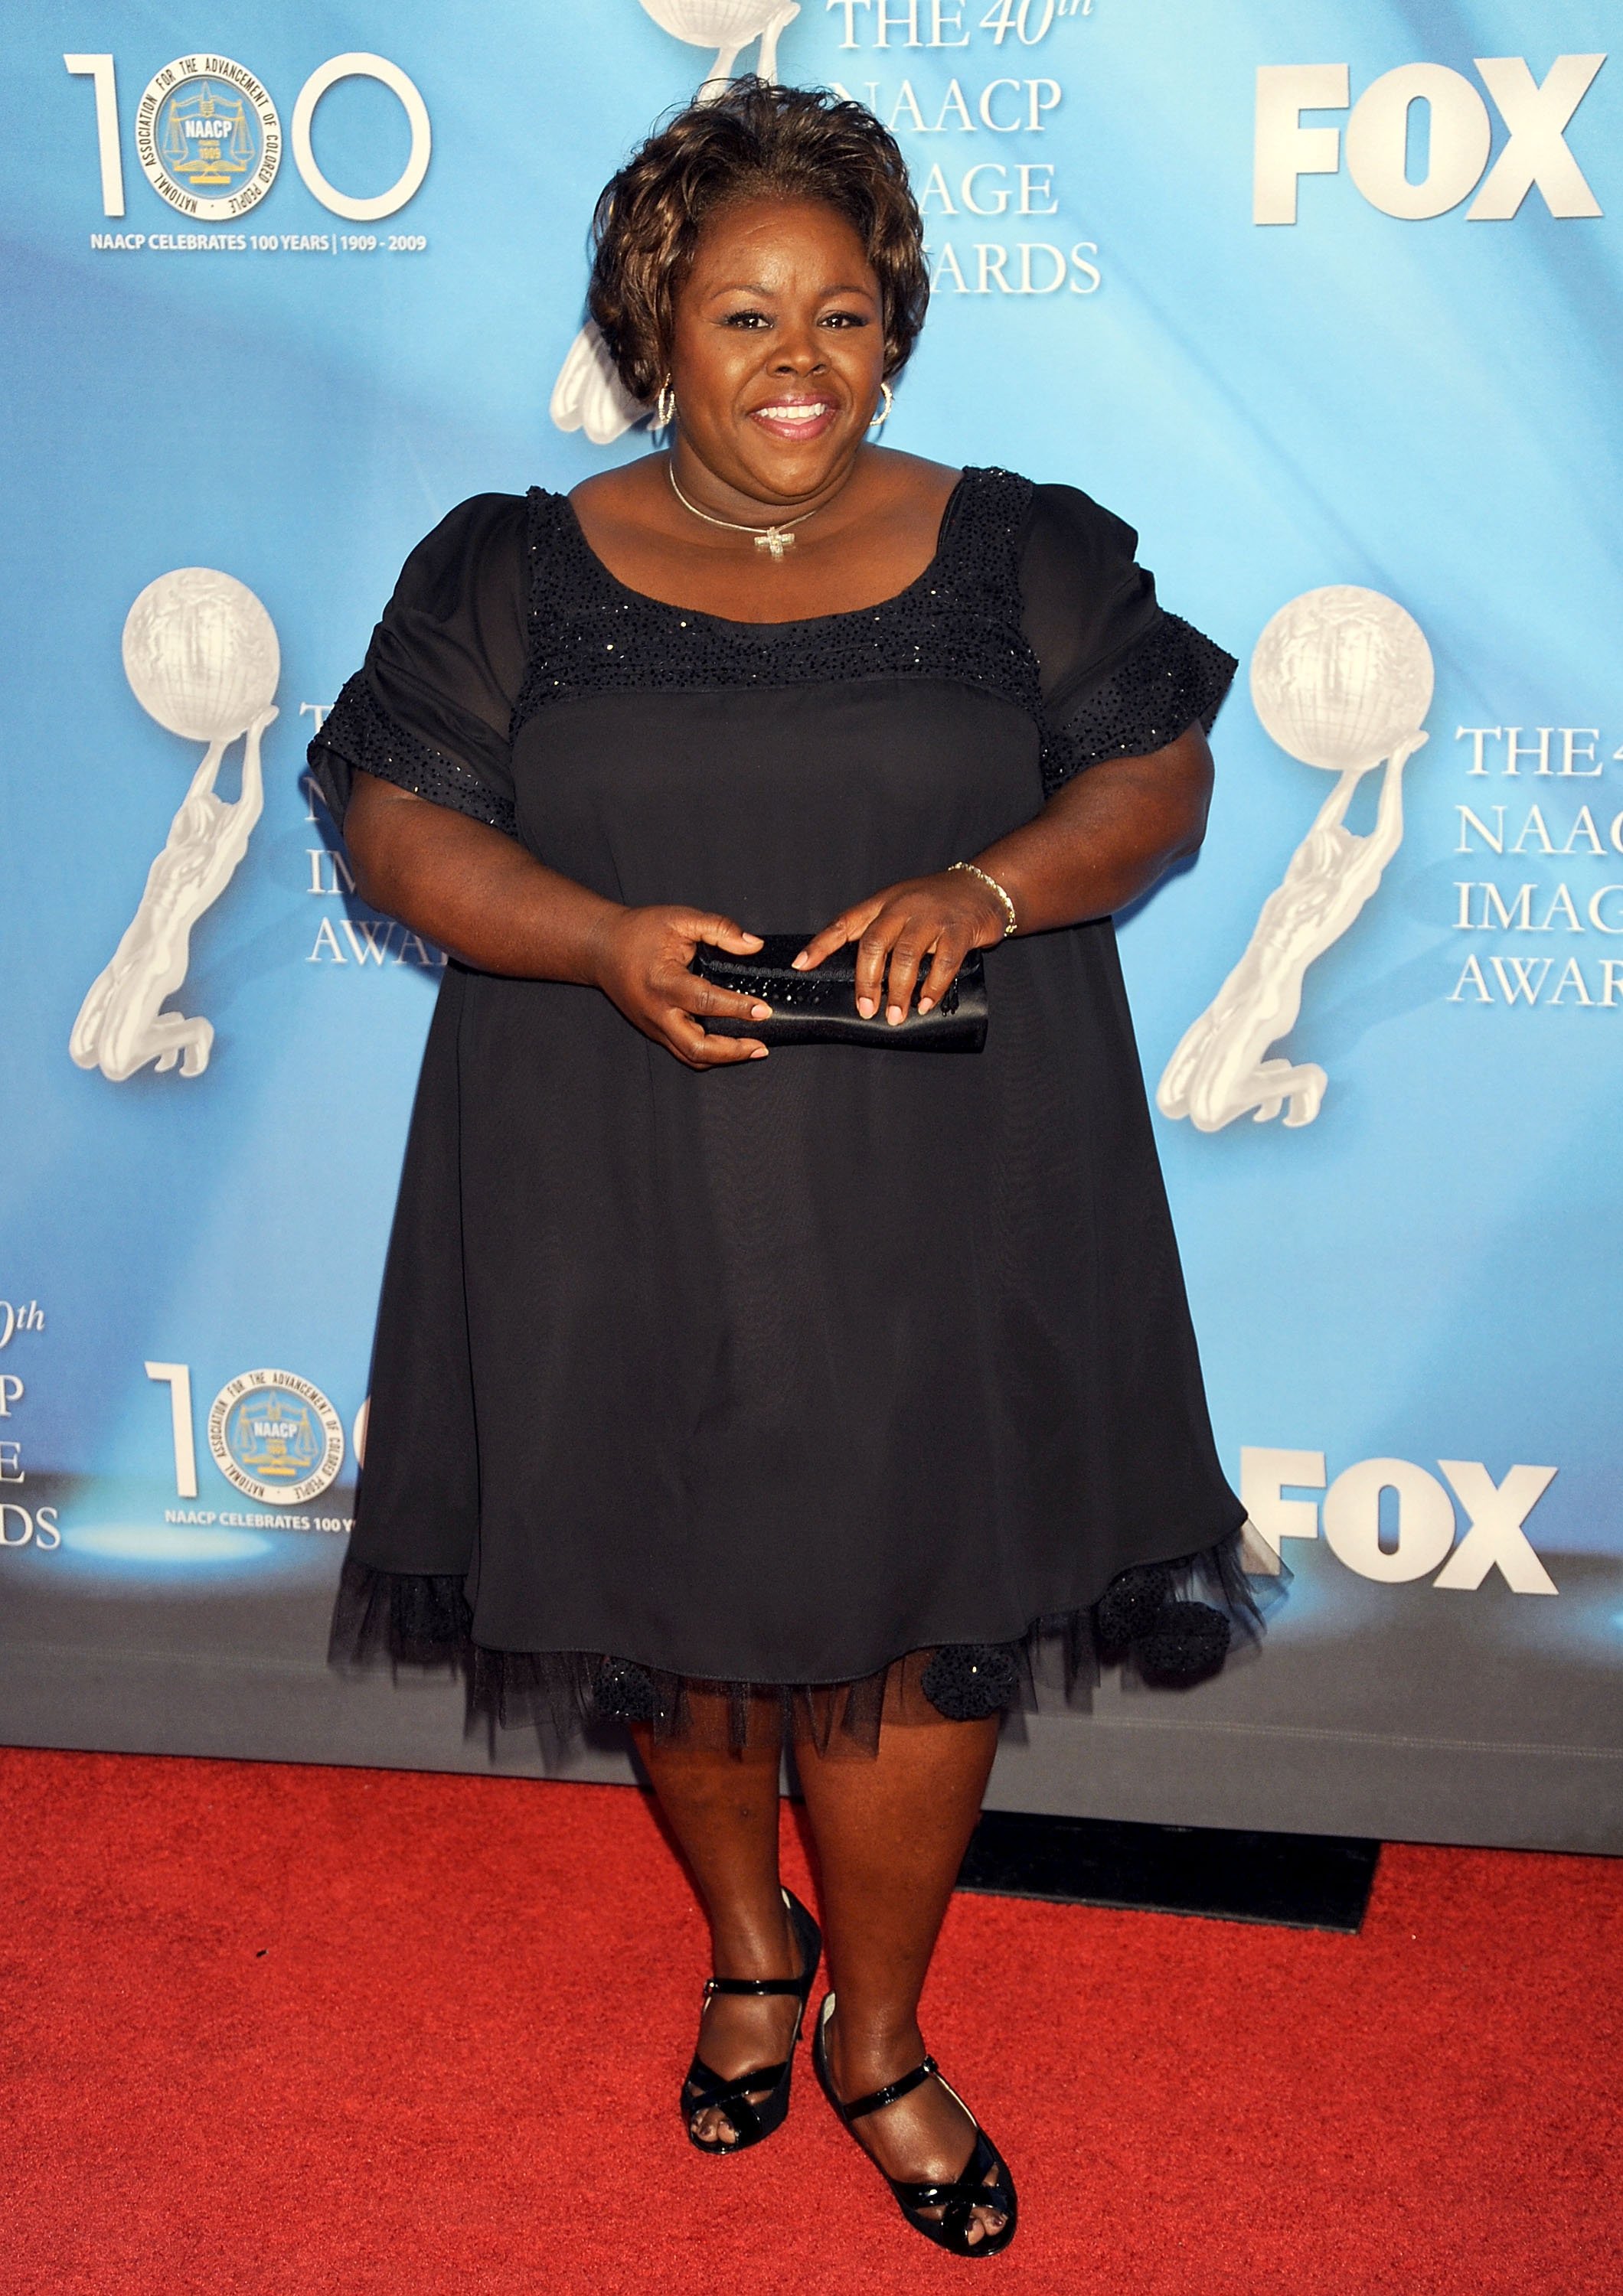 Cassi Davis poses at the 40th NAACP Image Awards on February 12, 2009 in Los Angeles, California | Photo: Getty Images